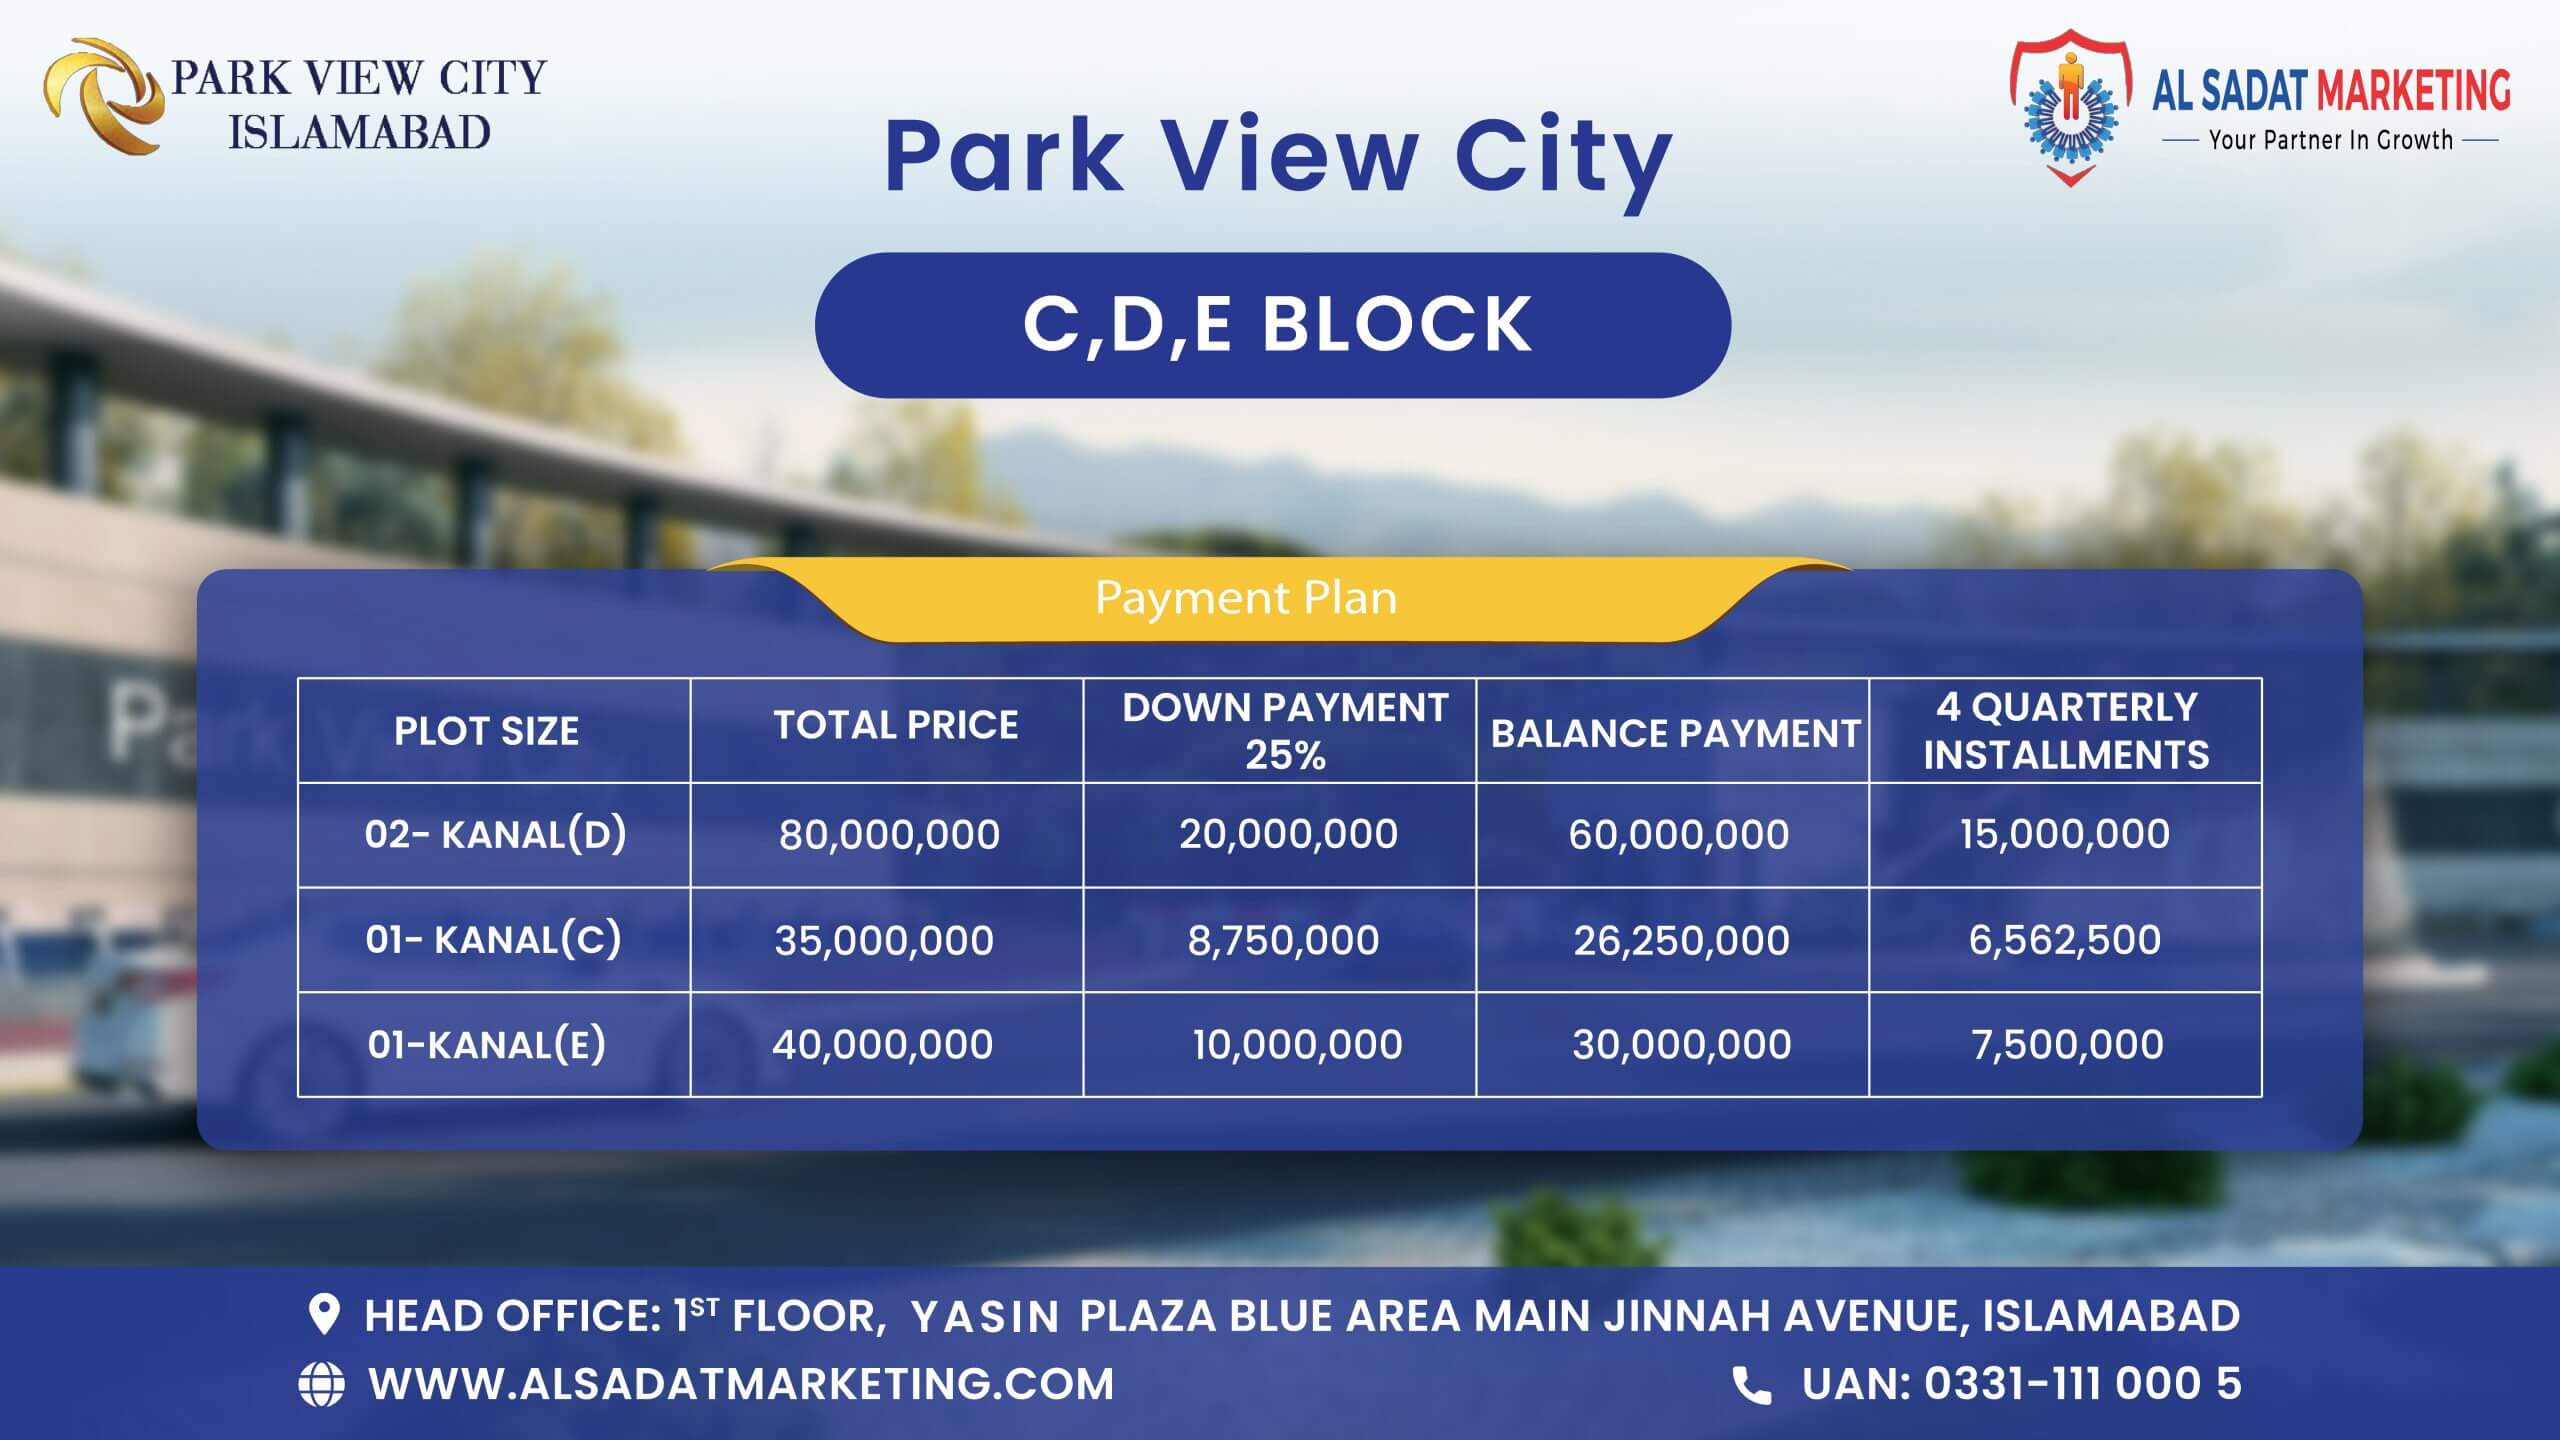 park view city islamabad c, d and e block payment plan - park view city c, d and e block payment plan – park view city islamabad payment plan - park view city payment plan - payment plan of park view city islamabad – payment plan of park view city – park view city islamabad – park view city – park view city housing society - park view city islamabad housing society – park view city real estate project - park view city islamabad real estate project - al sadat marketing - alsadat marketing - al-sadat marketing